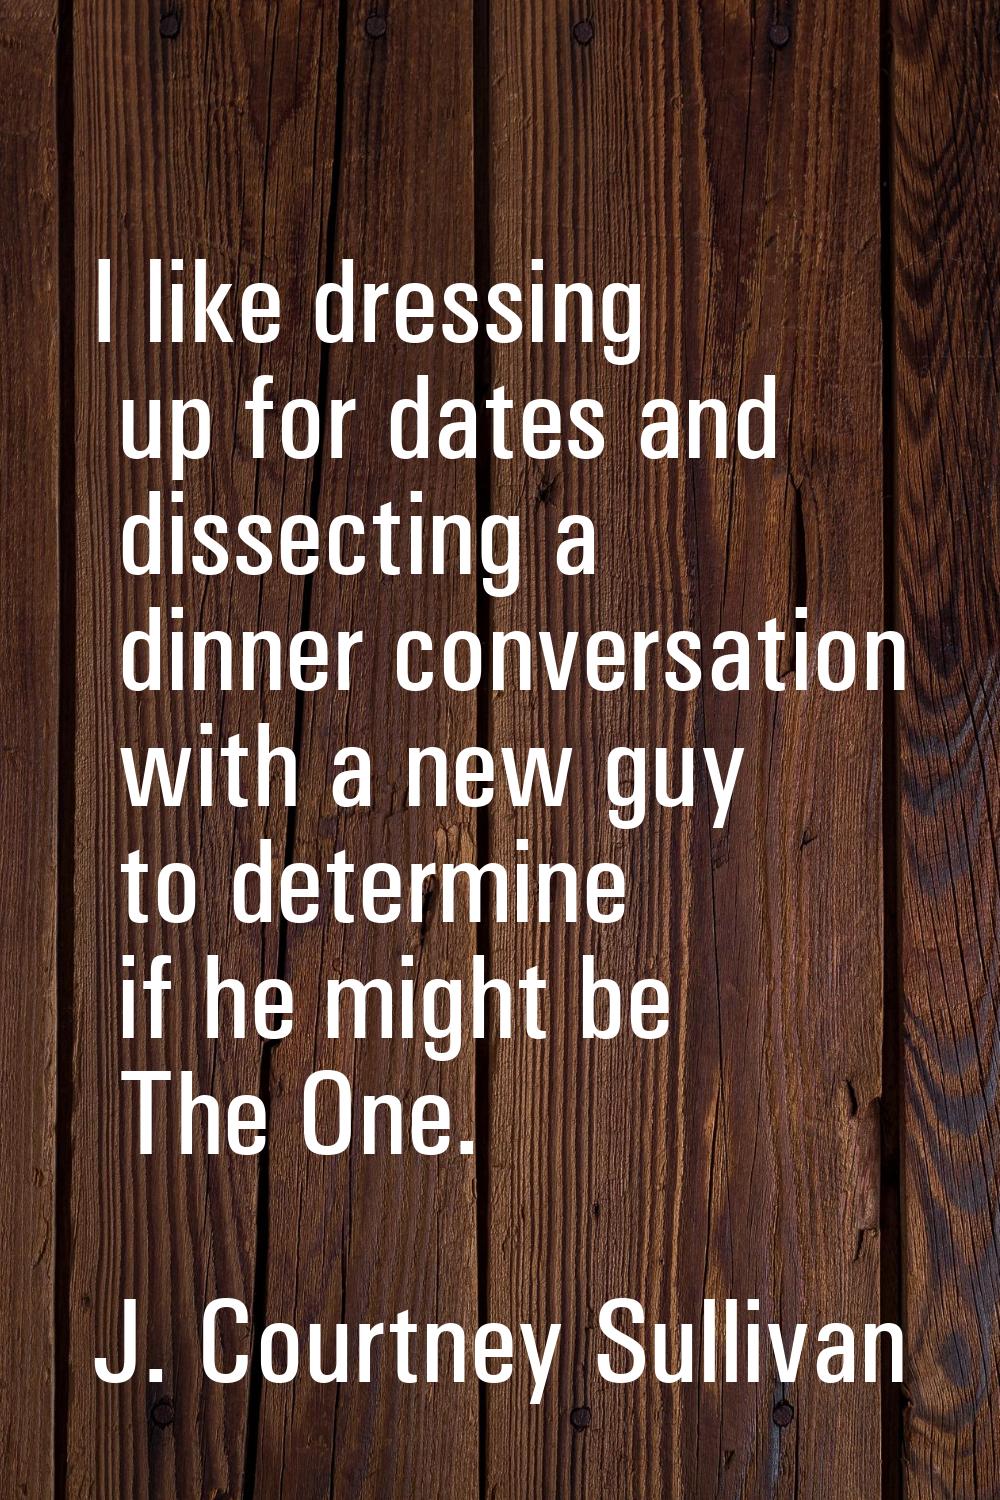 I like dressing up for dates and dissecting a dinner conversation with a new guy to determine if he